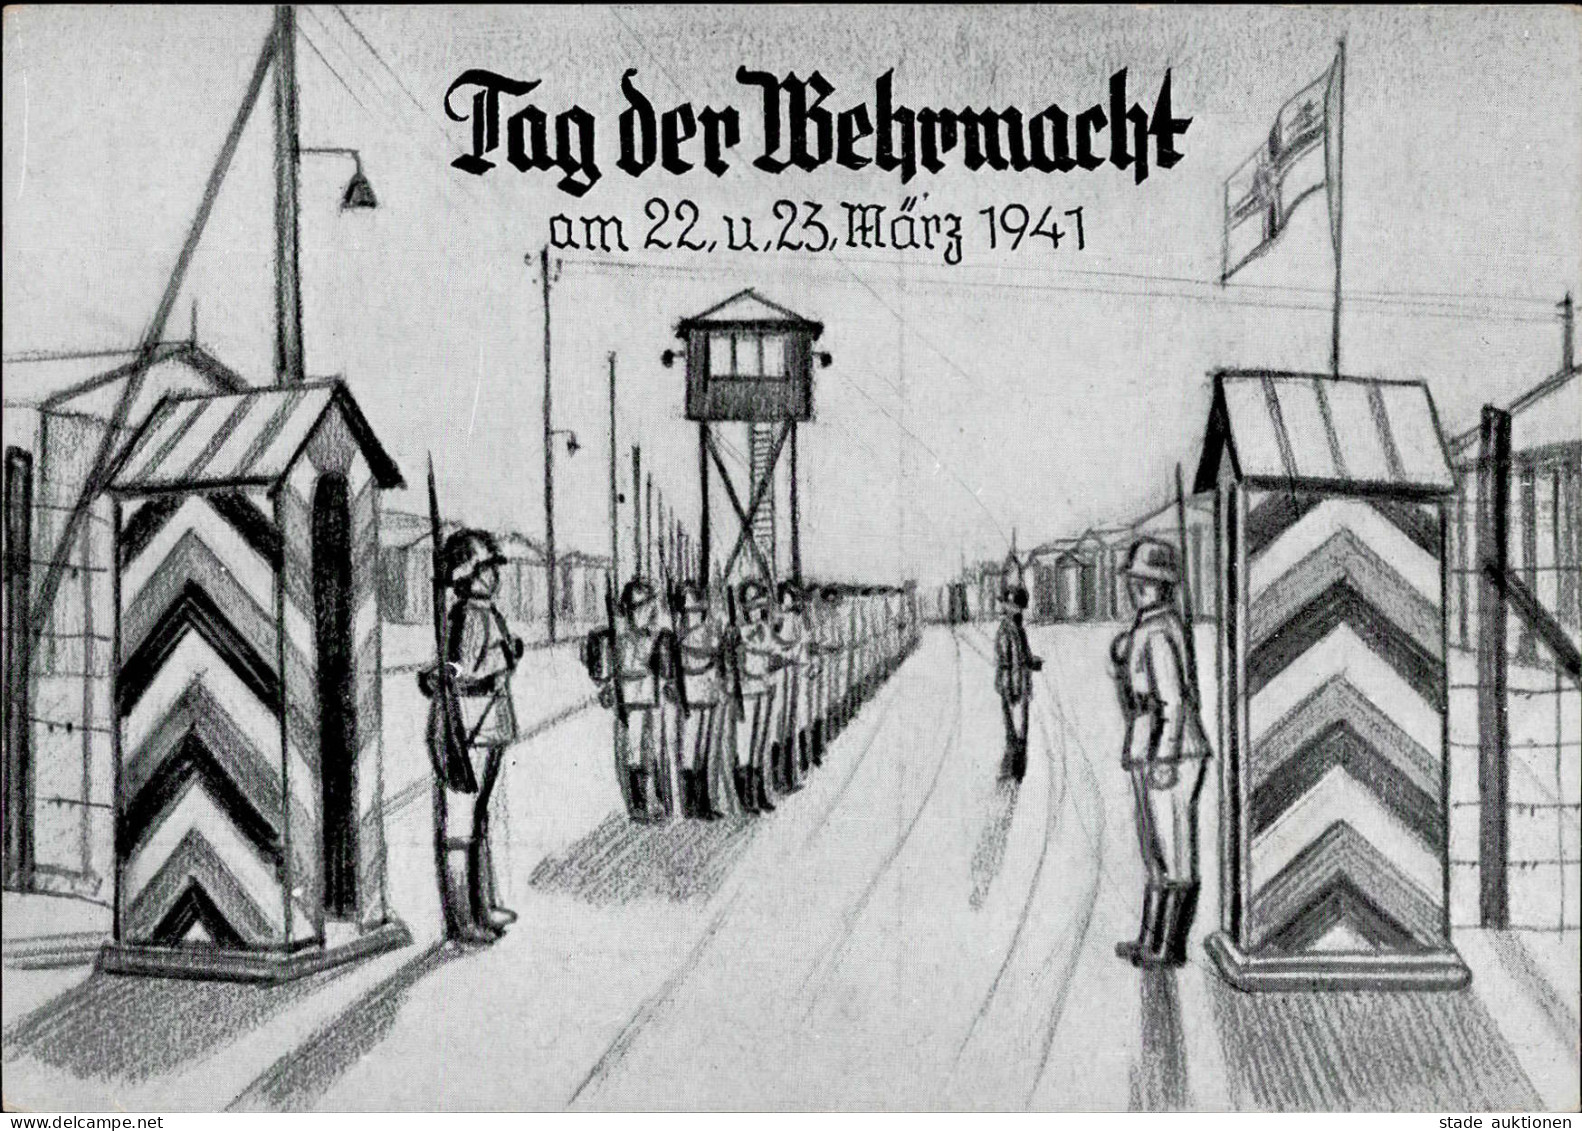 WHW WK II - TAG Der WEHRMACHT 1941 LAGER I - Guerre 1939-45